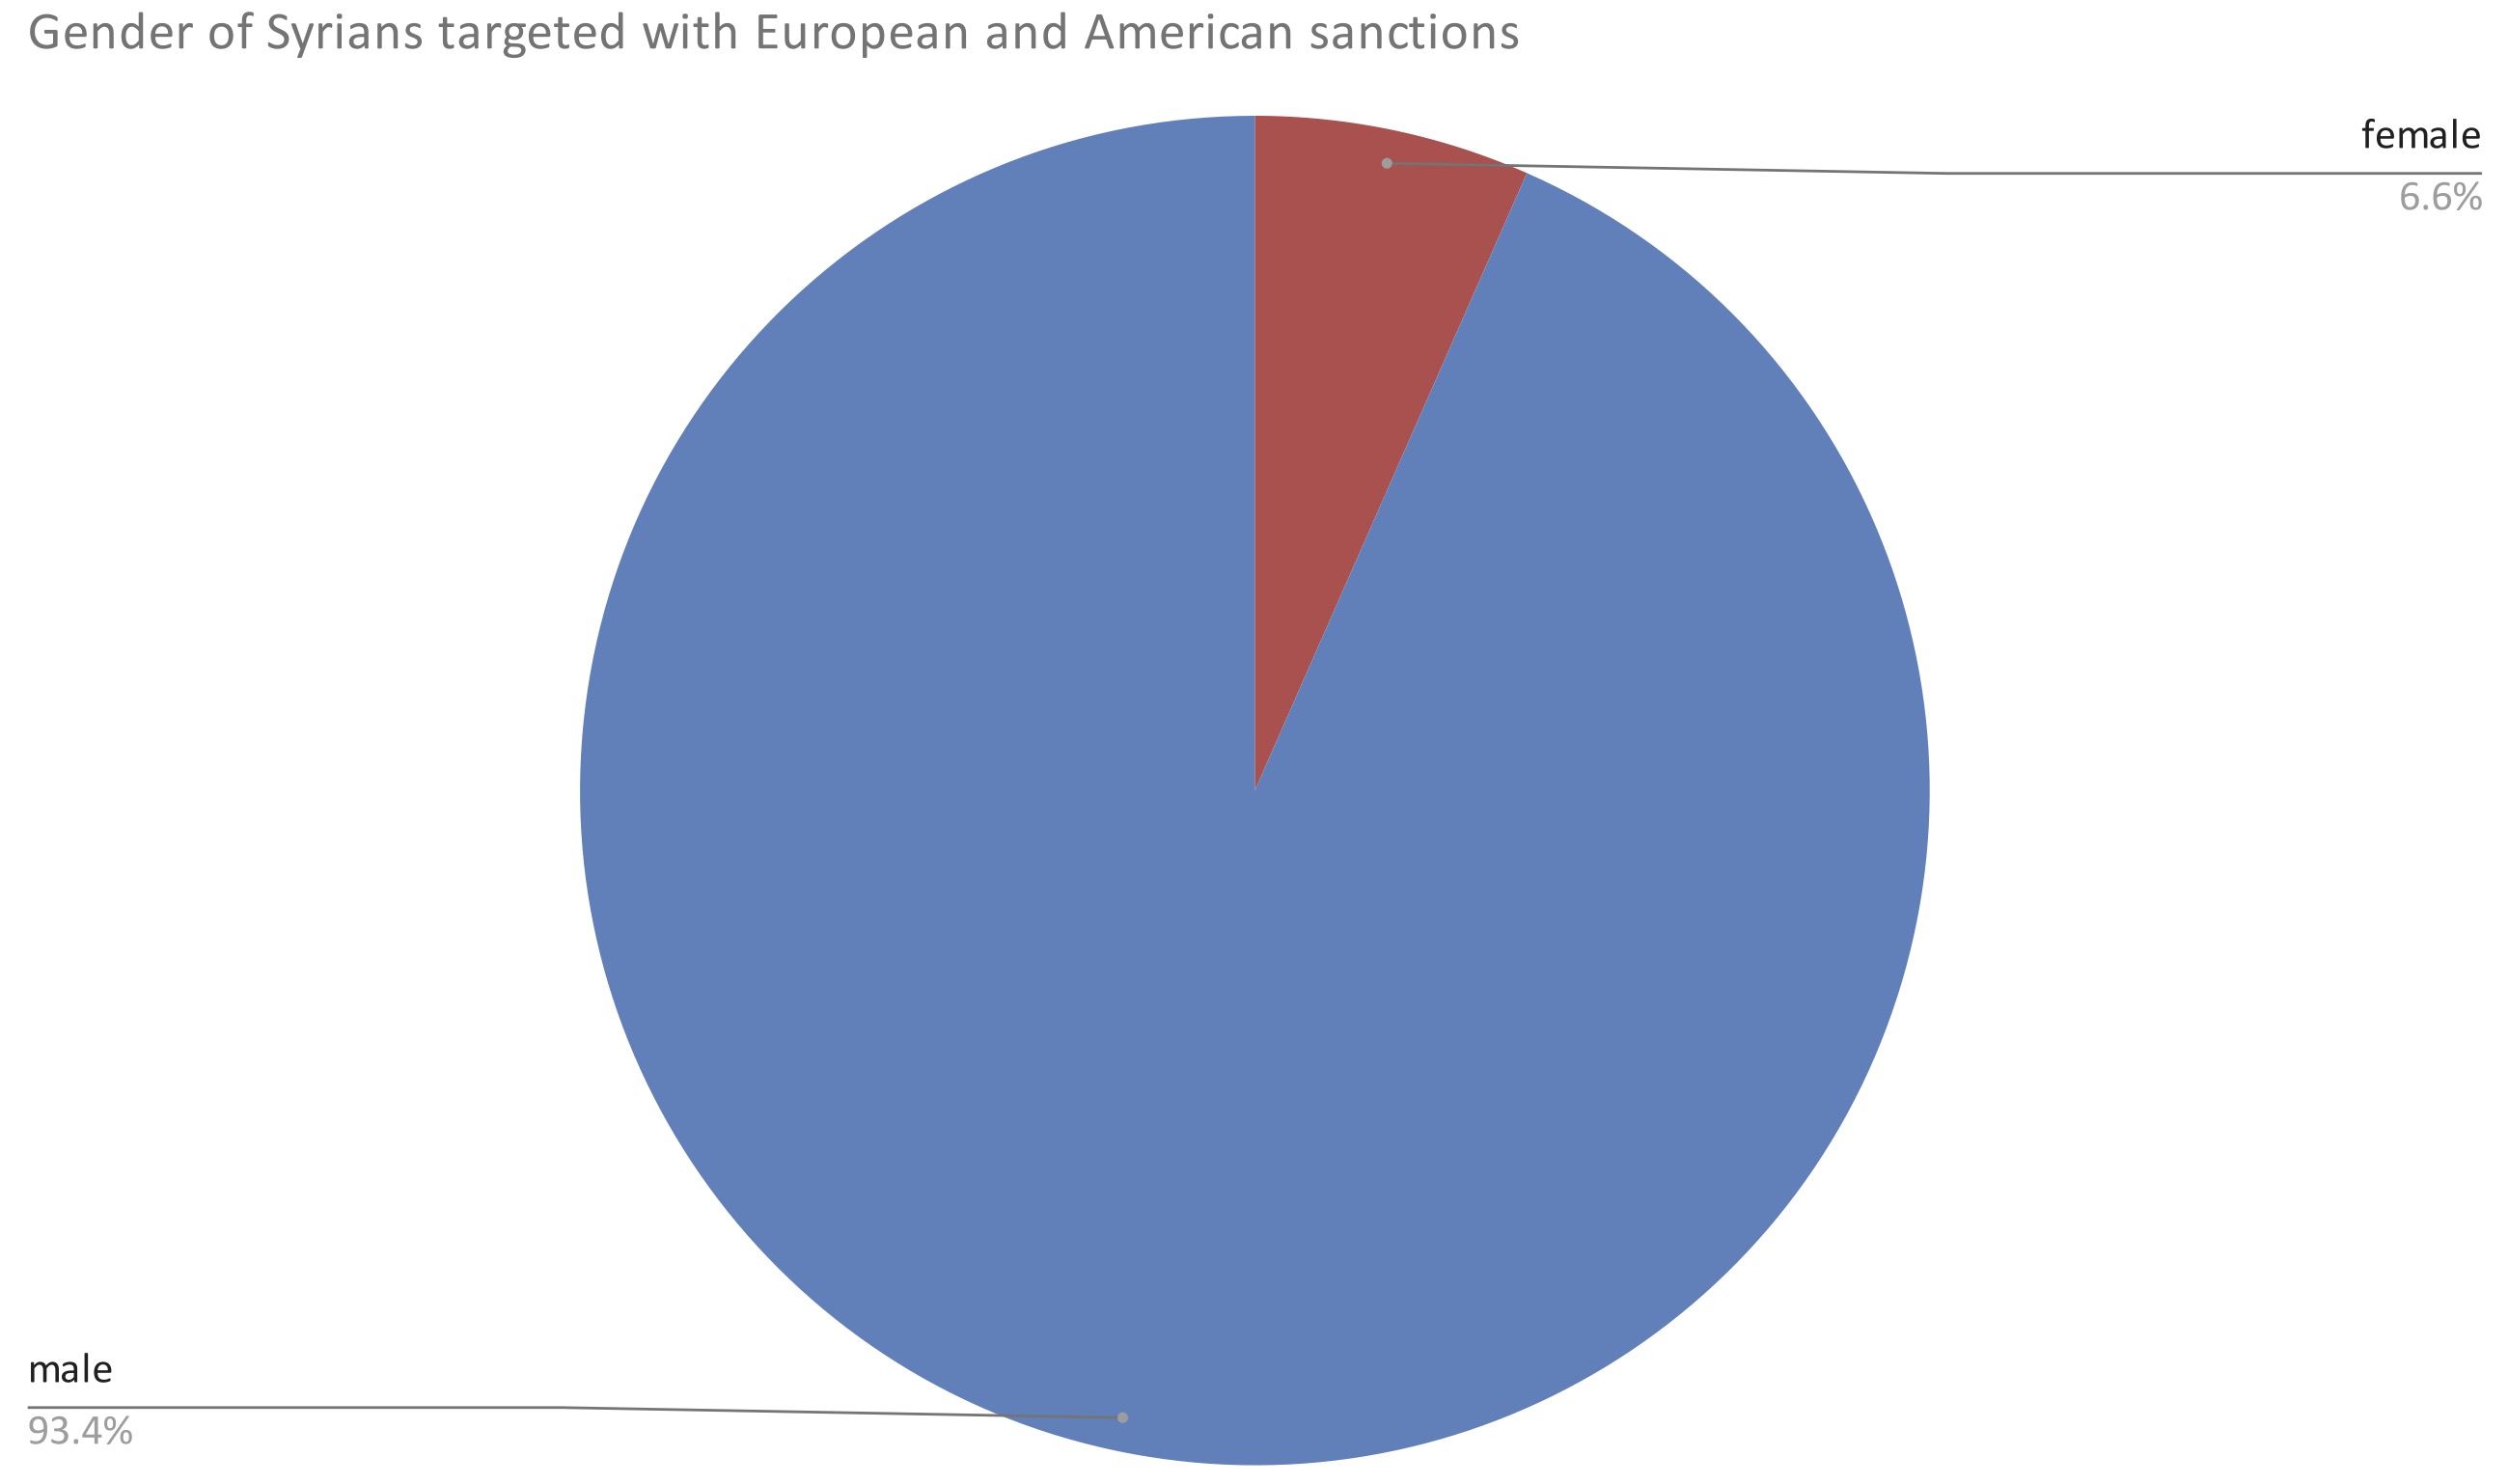  Figure 4: Gender of Syrians targeted with EU and US sanctions